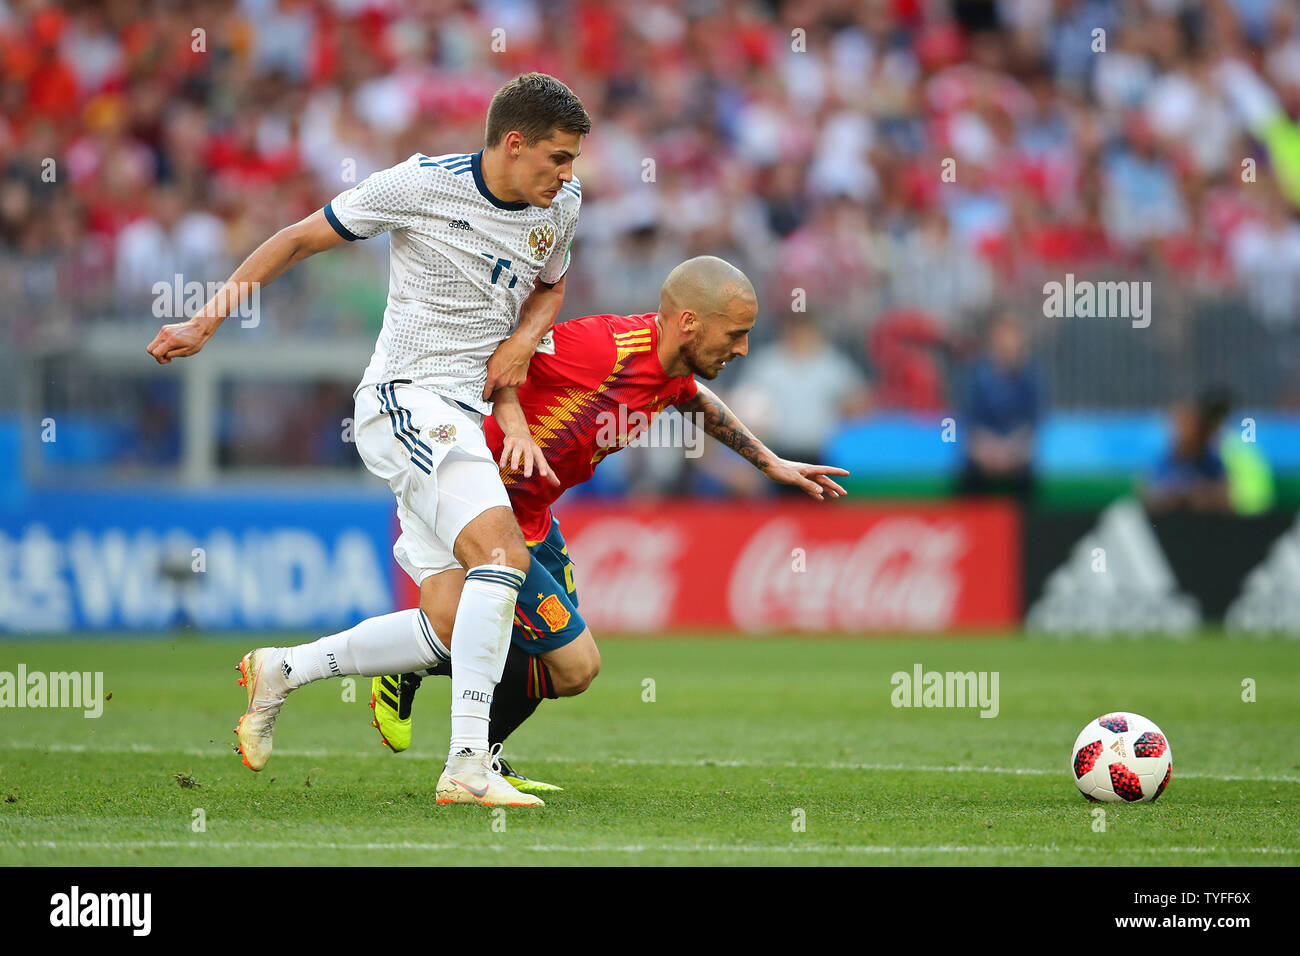 David Silva (R) of Spain competes for the ball with Roman Zobnin of Russia during the 2018 FIFA World Cup Round of 16 match at Luzhniki Stadium in Moscow, Russia on July 1, 2018.  Russia beat Spain 4-2 on penalties to qualify for the quarter-finals. Photo by Chris Brunskill/UPI Stock Photo